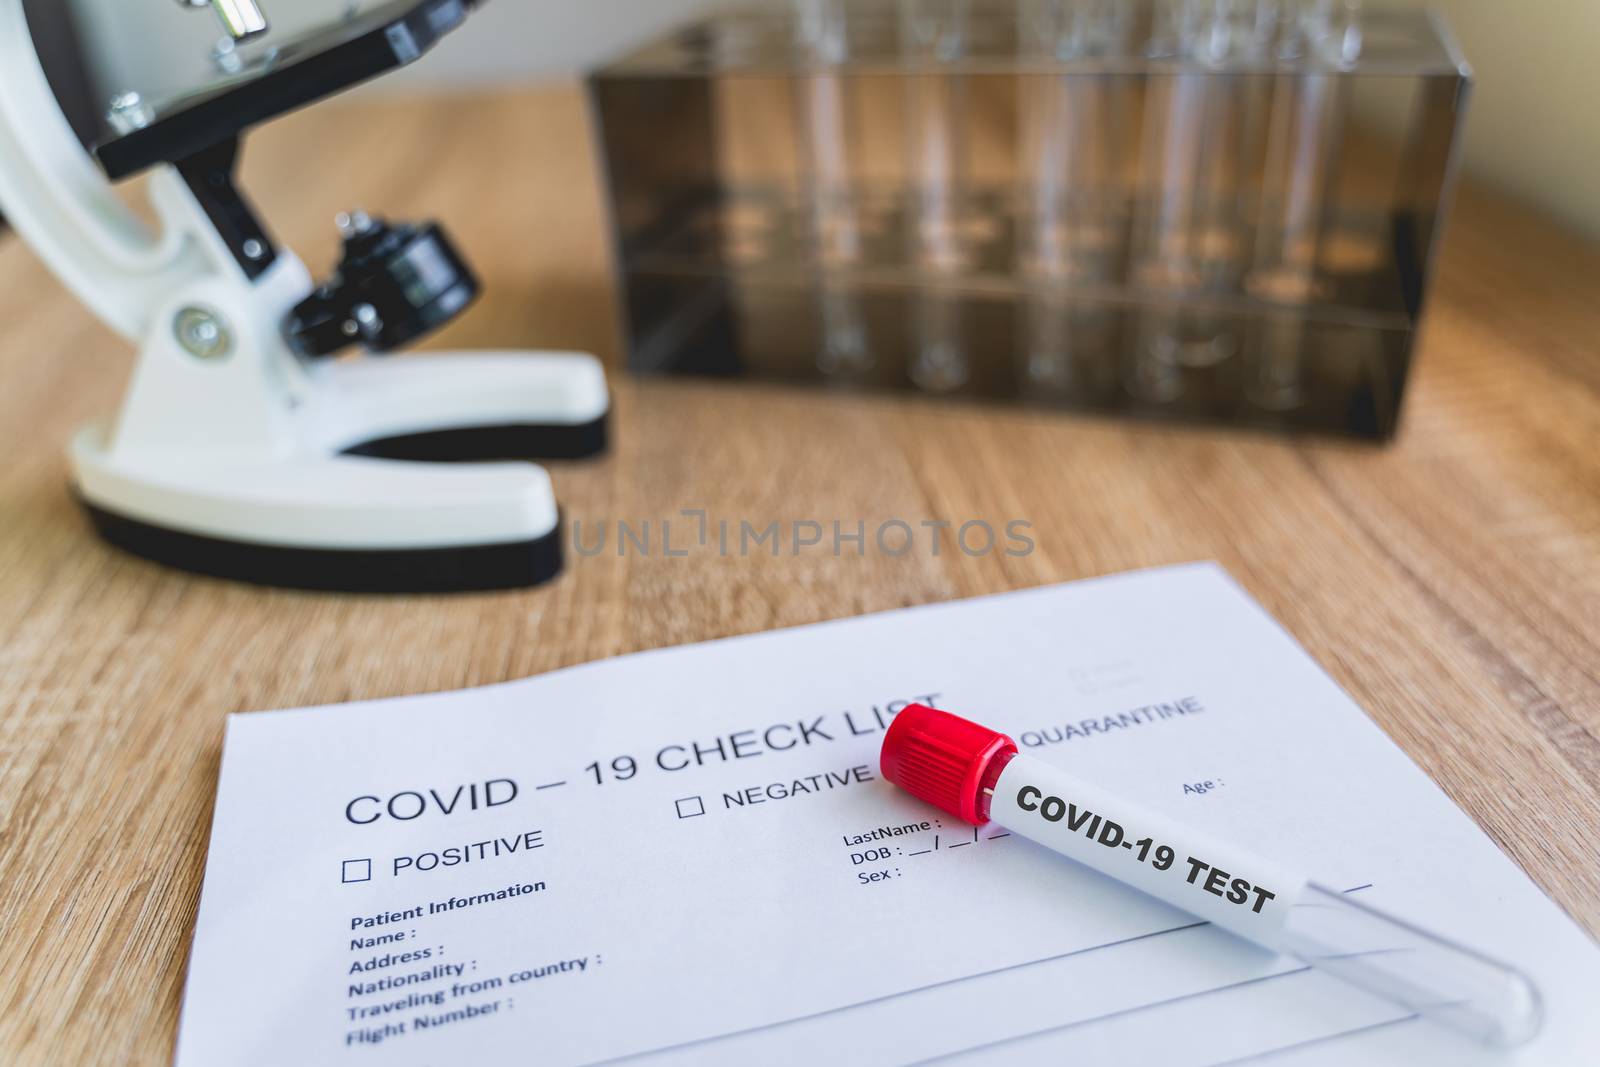 COVID19 Check List and blood test tube to detect corona virus in by Boophuket